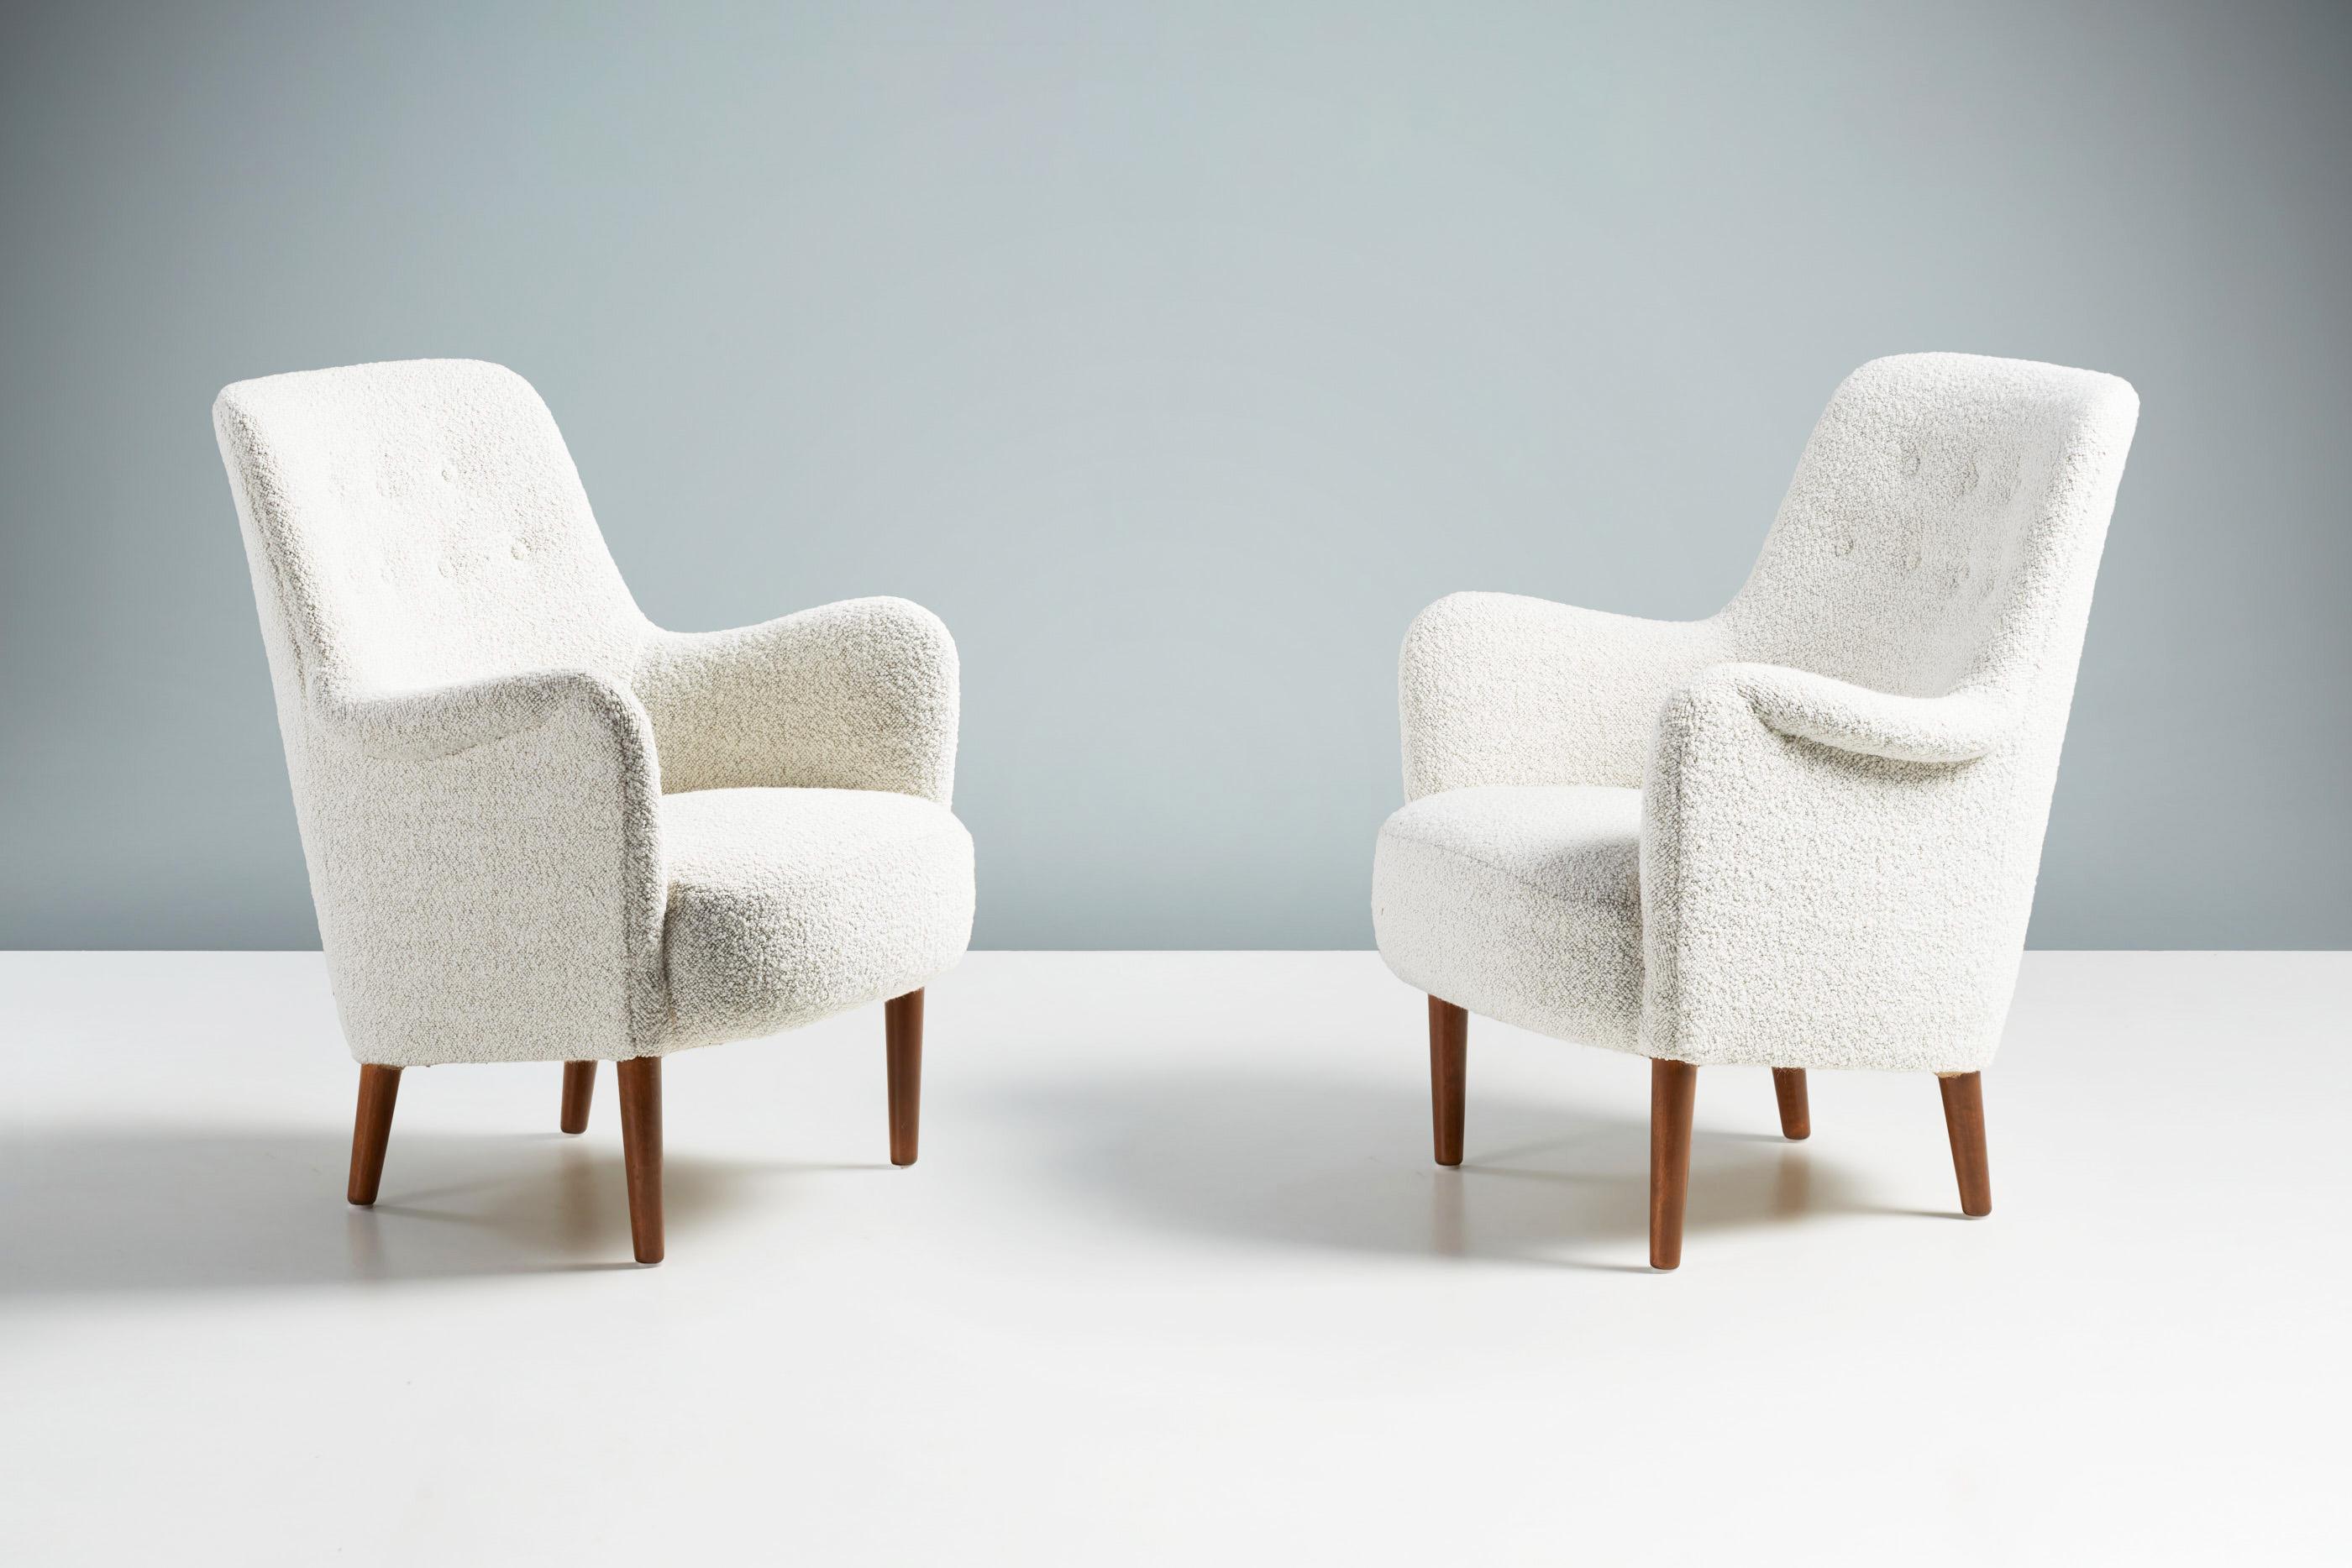 Carl Malmsten Armchairs, circa 1950s

A pair of upholstered armchairs from Swedish master: Carl Malmsten. This model is a lighter variation on the Samsas chair with taller legs. This pair has been reupholstered in Dedar Karakorum ‘Ecume’ fabric.